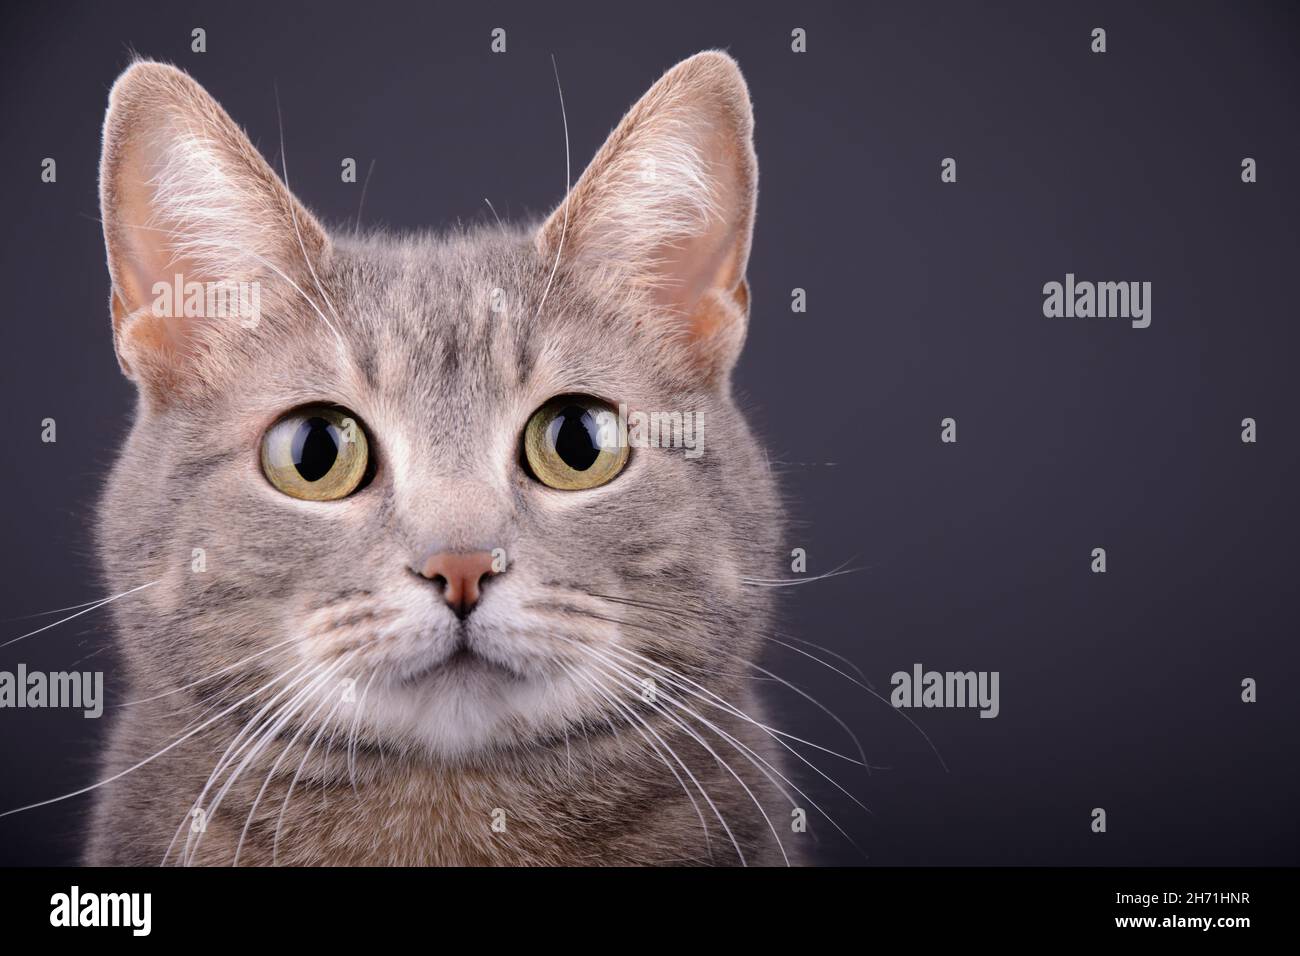 Closeup of a blue tabby cat's face, on dark gray background Stock Photo